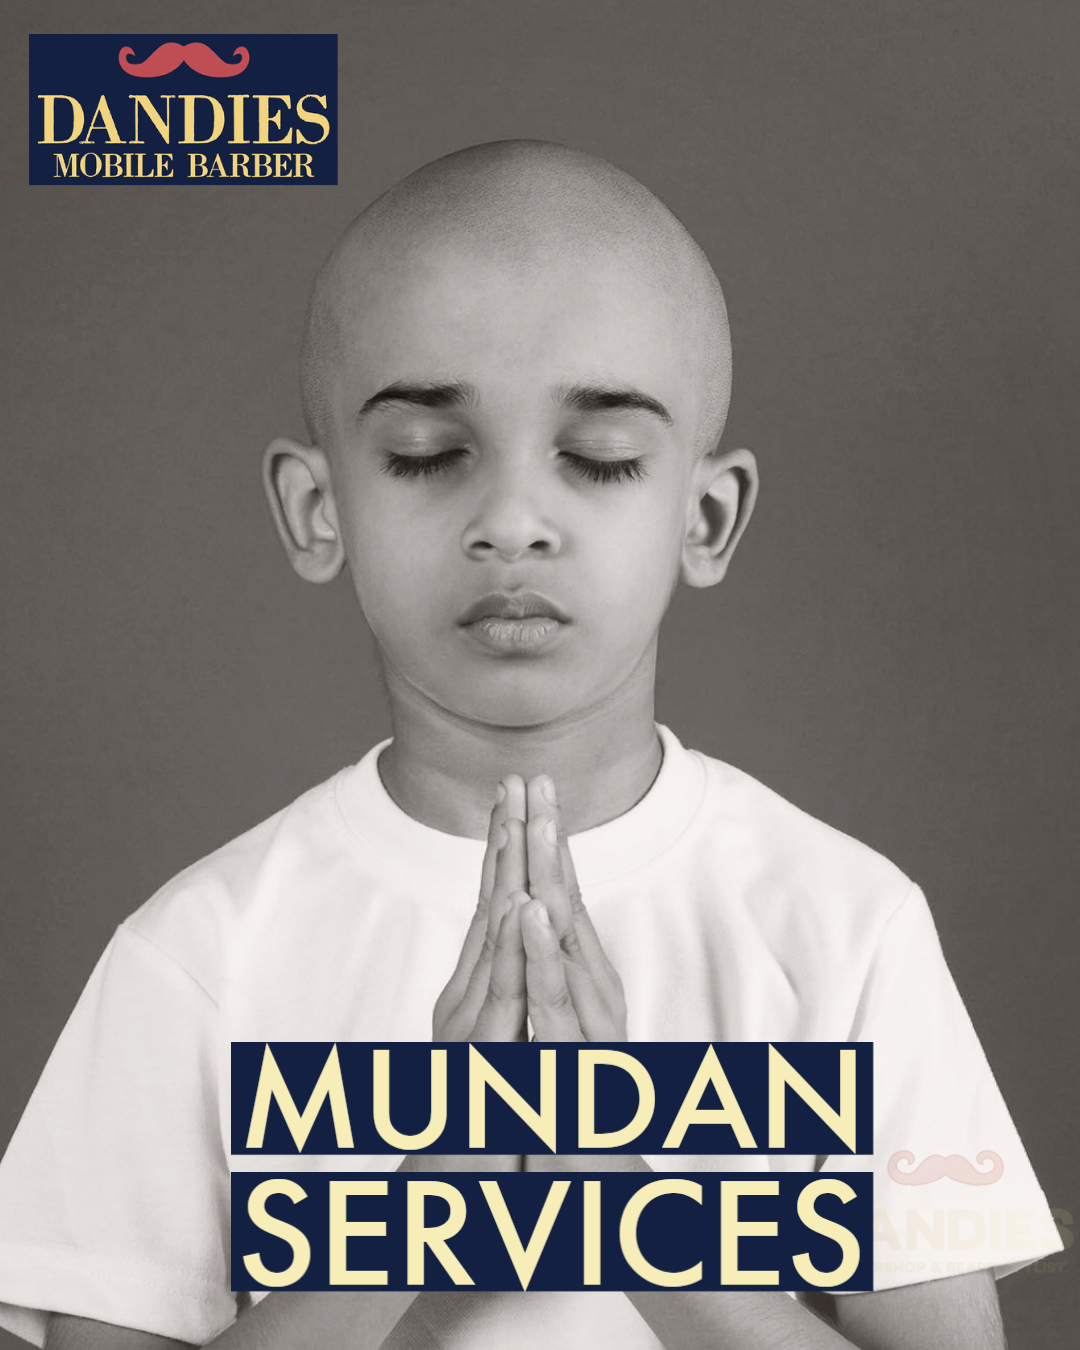 WHAT IS A MUNDAN CEREMONY, AND WHAT IS ITS SIGNIFICANCE?